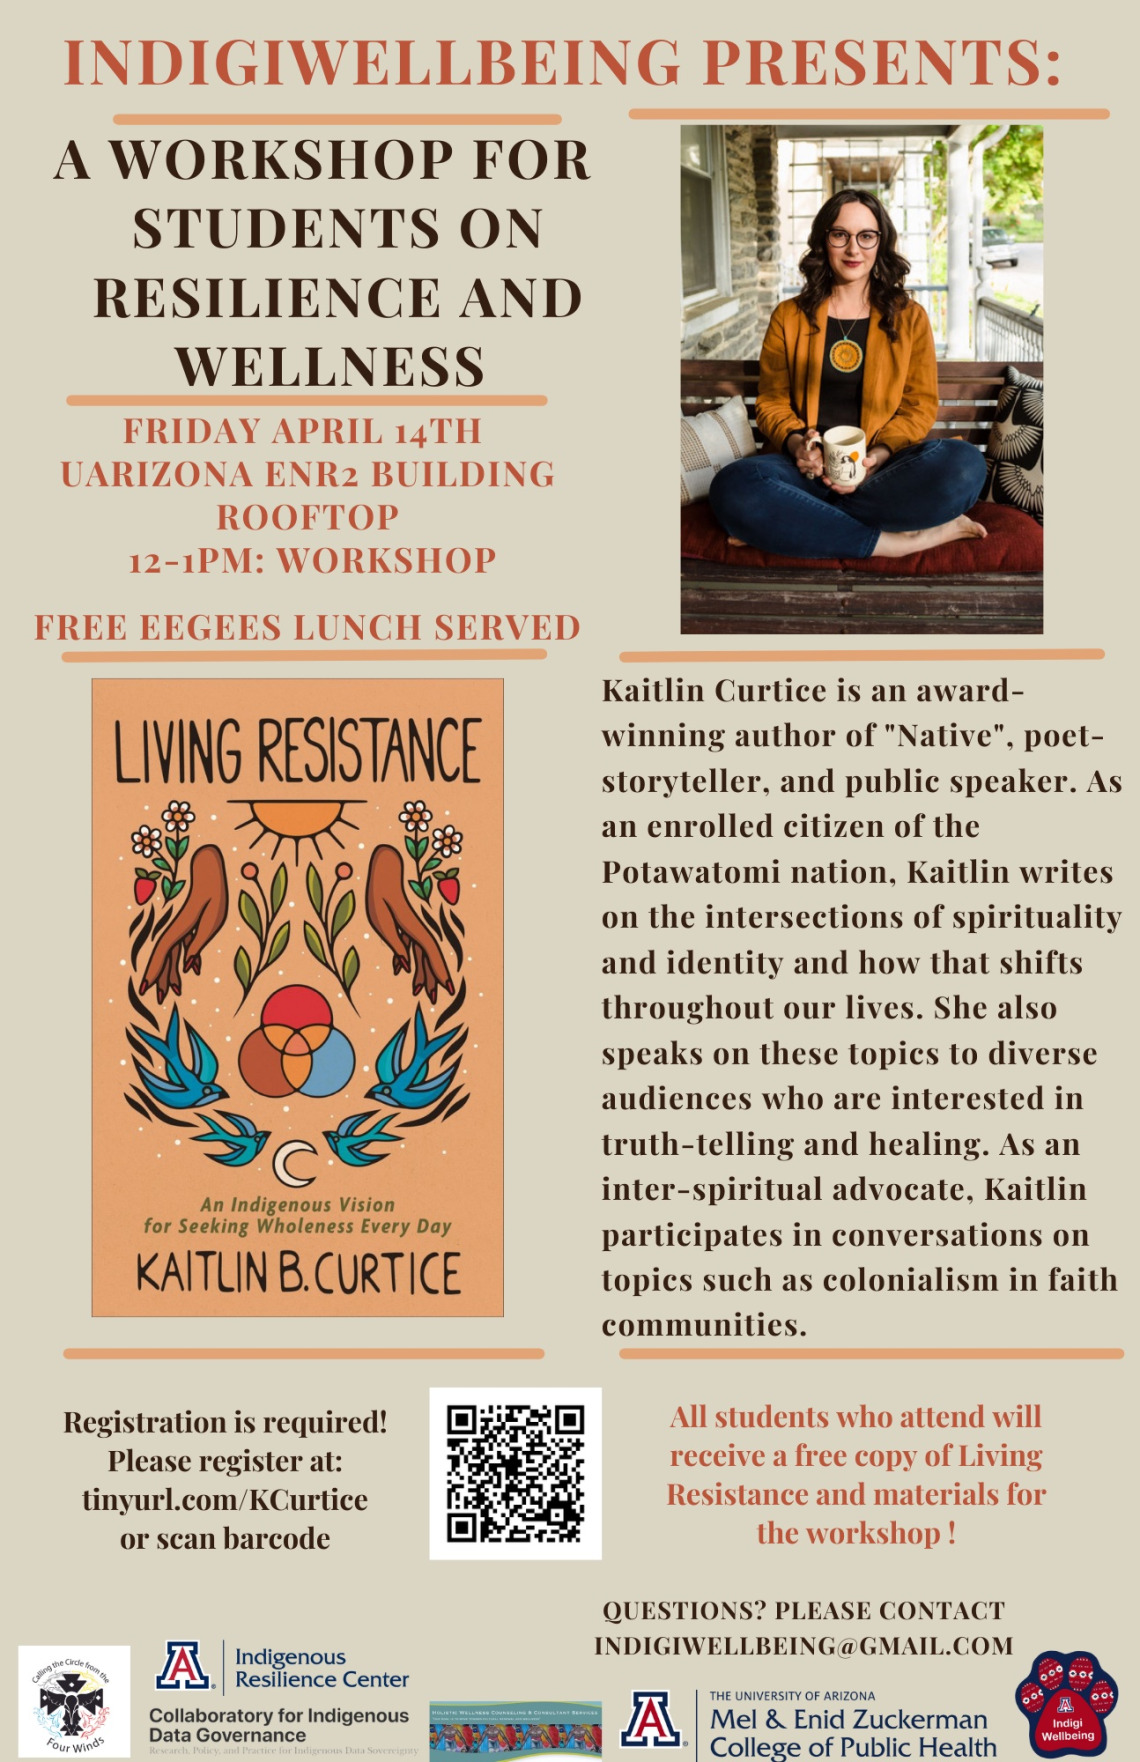 Indigiwellbeing presents a workshop for students on resilience and wellness